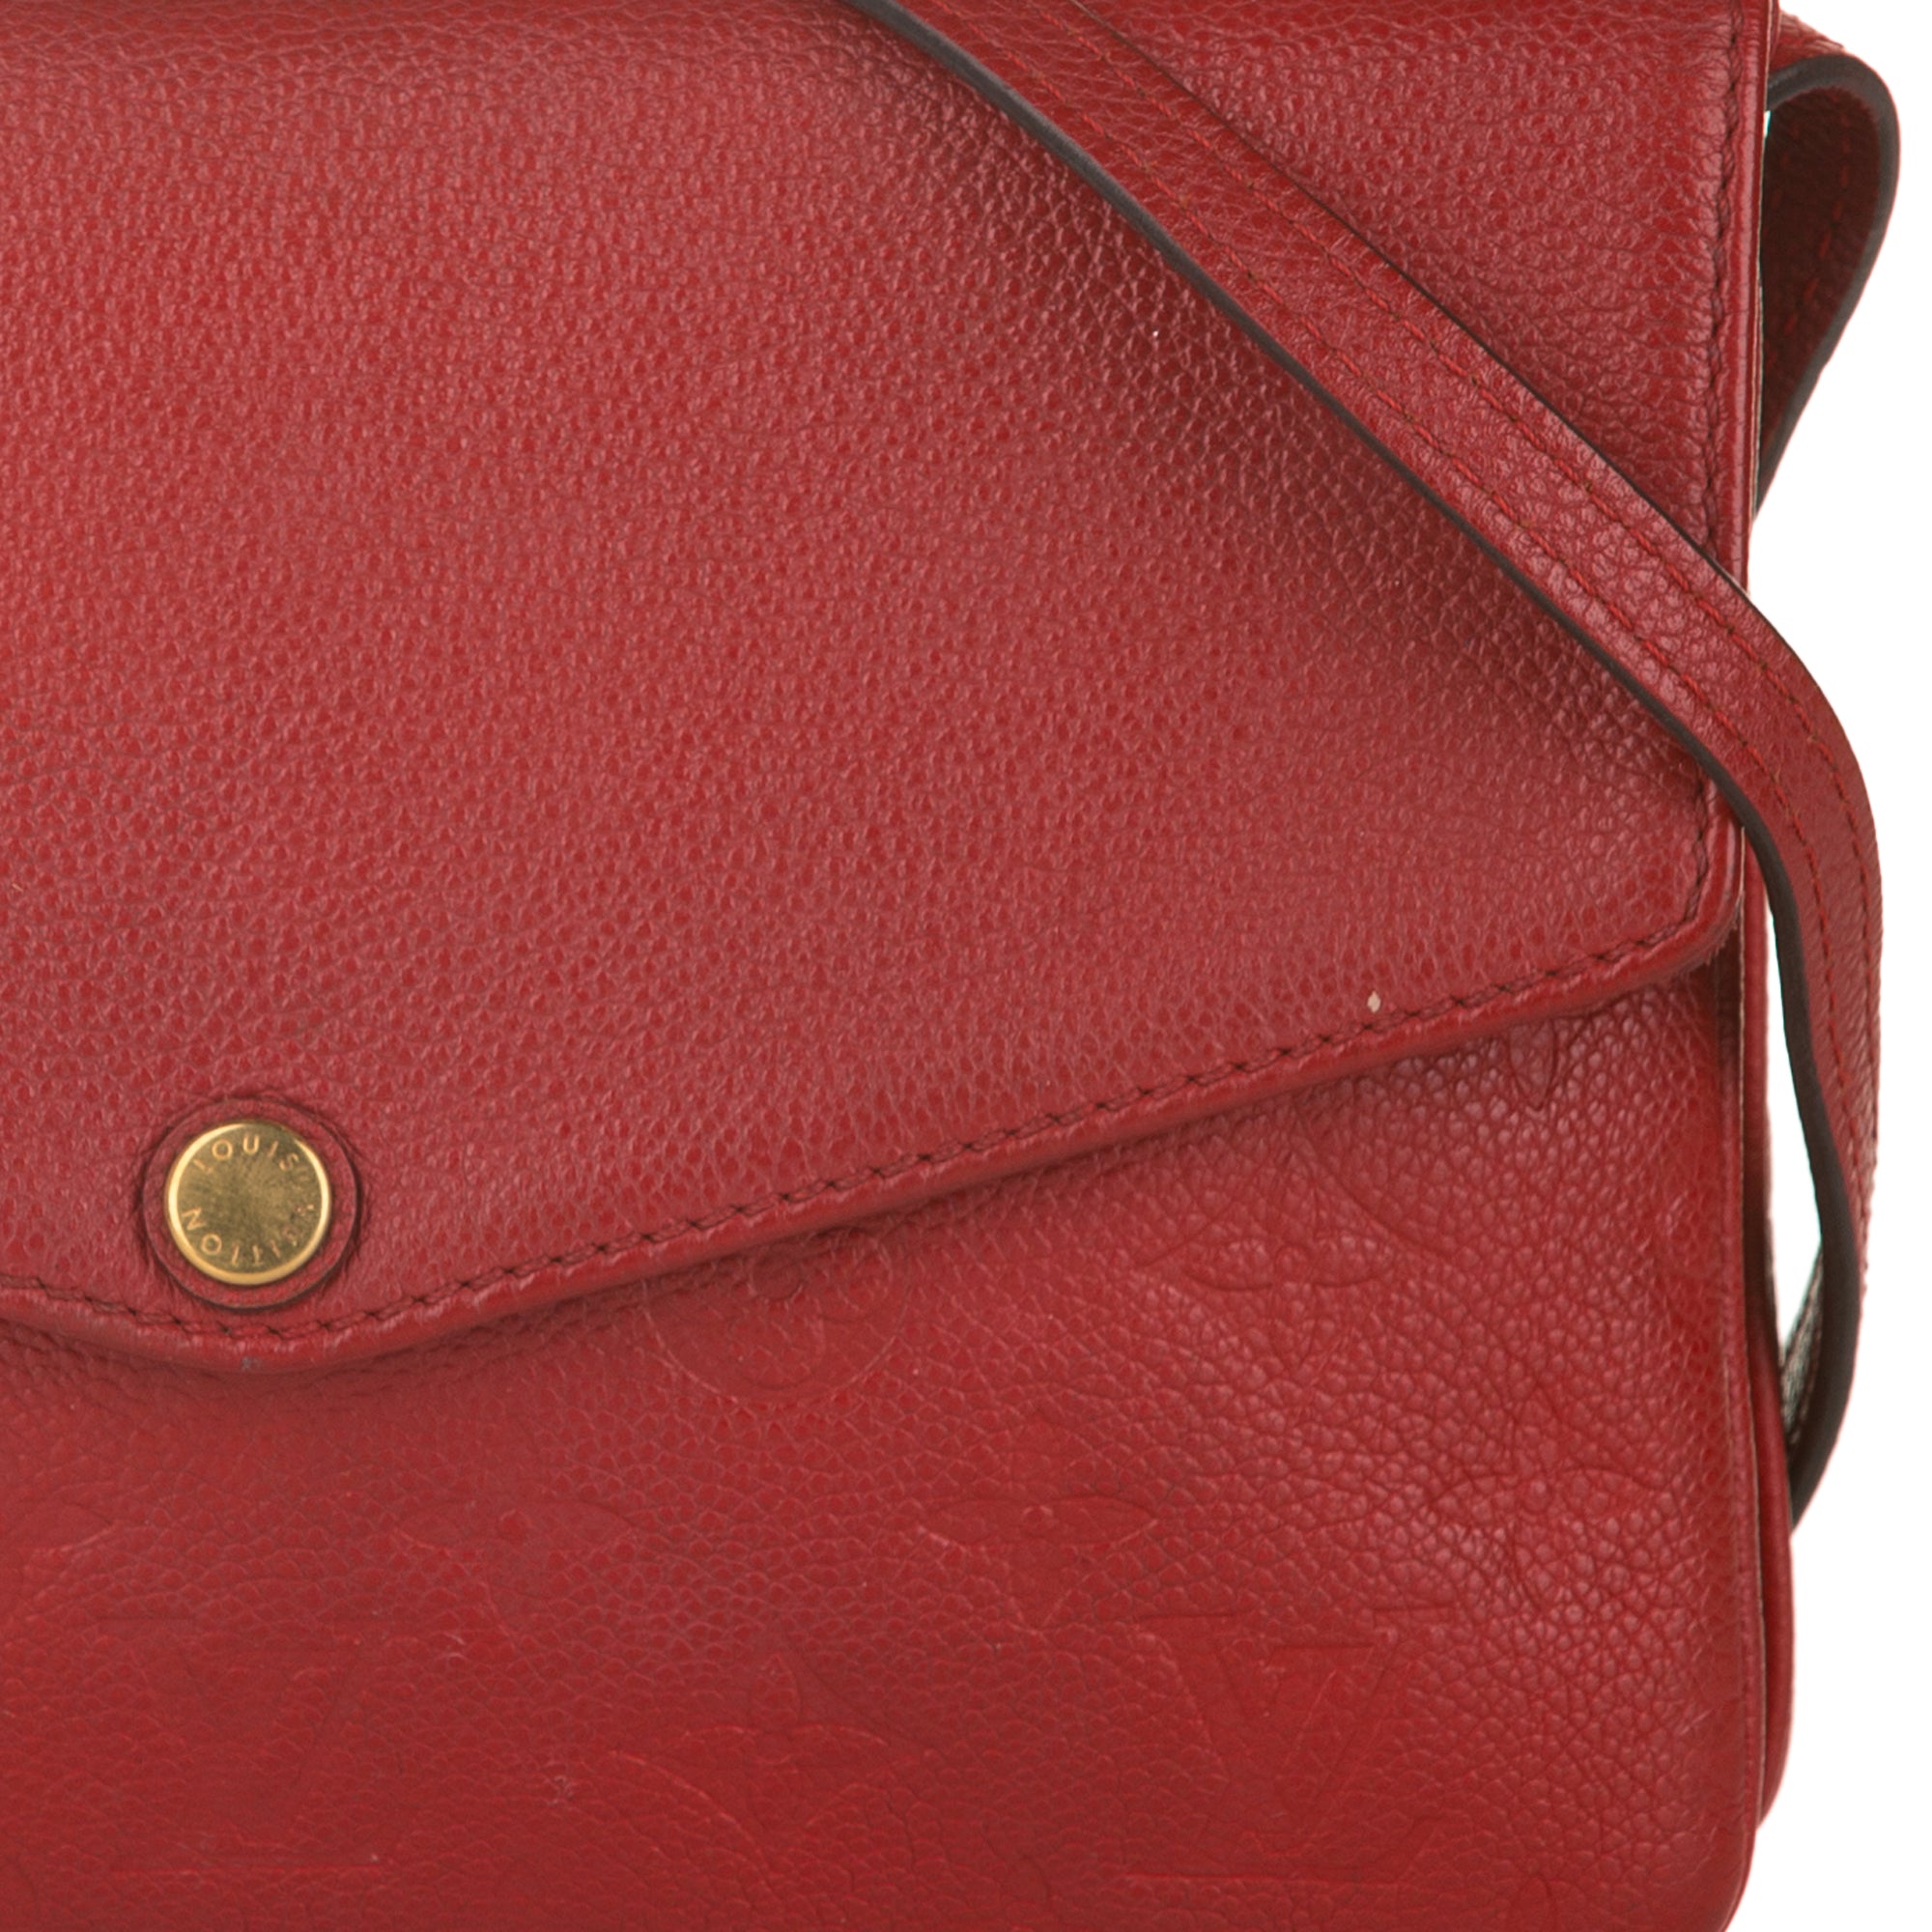 Louis Vuitton - Authenticated Twice Handbag - Leather Red Plain for Women, Very Good Condition